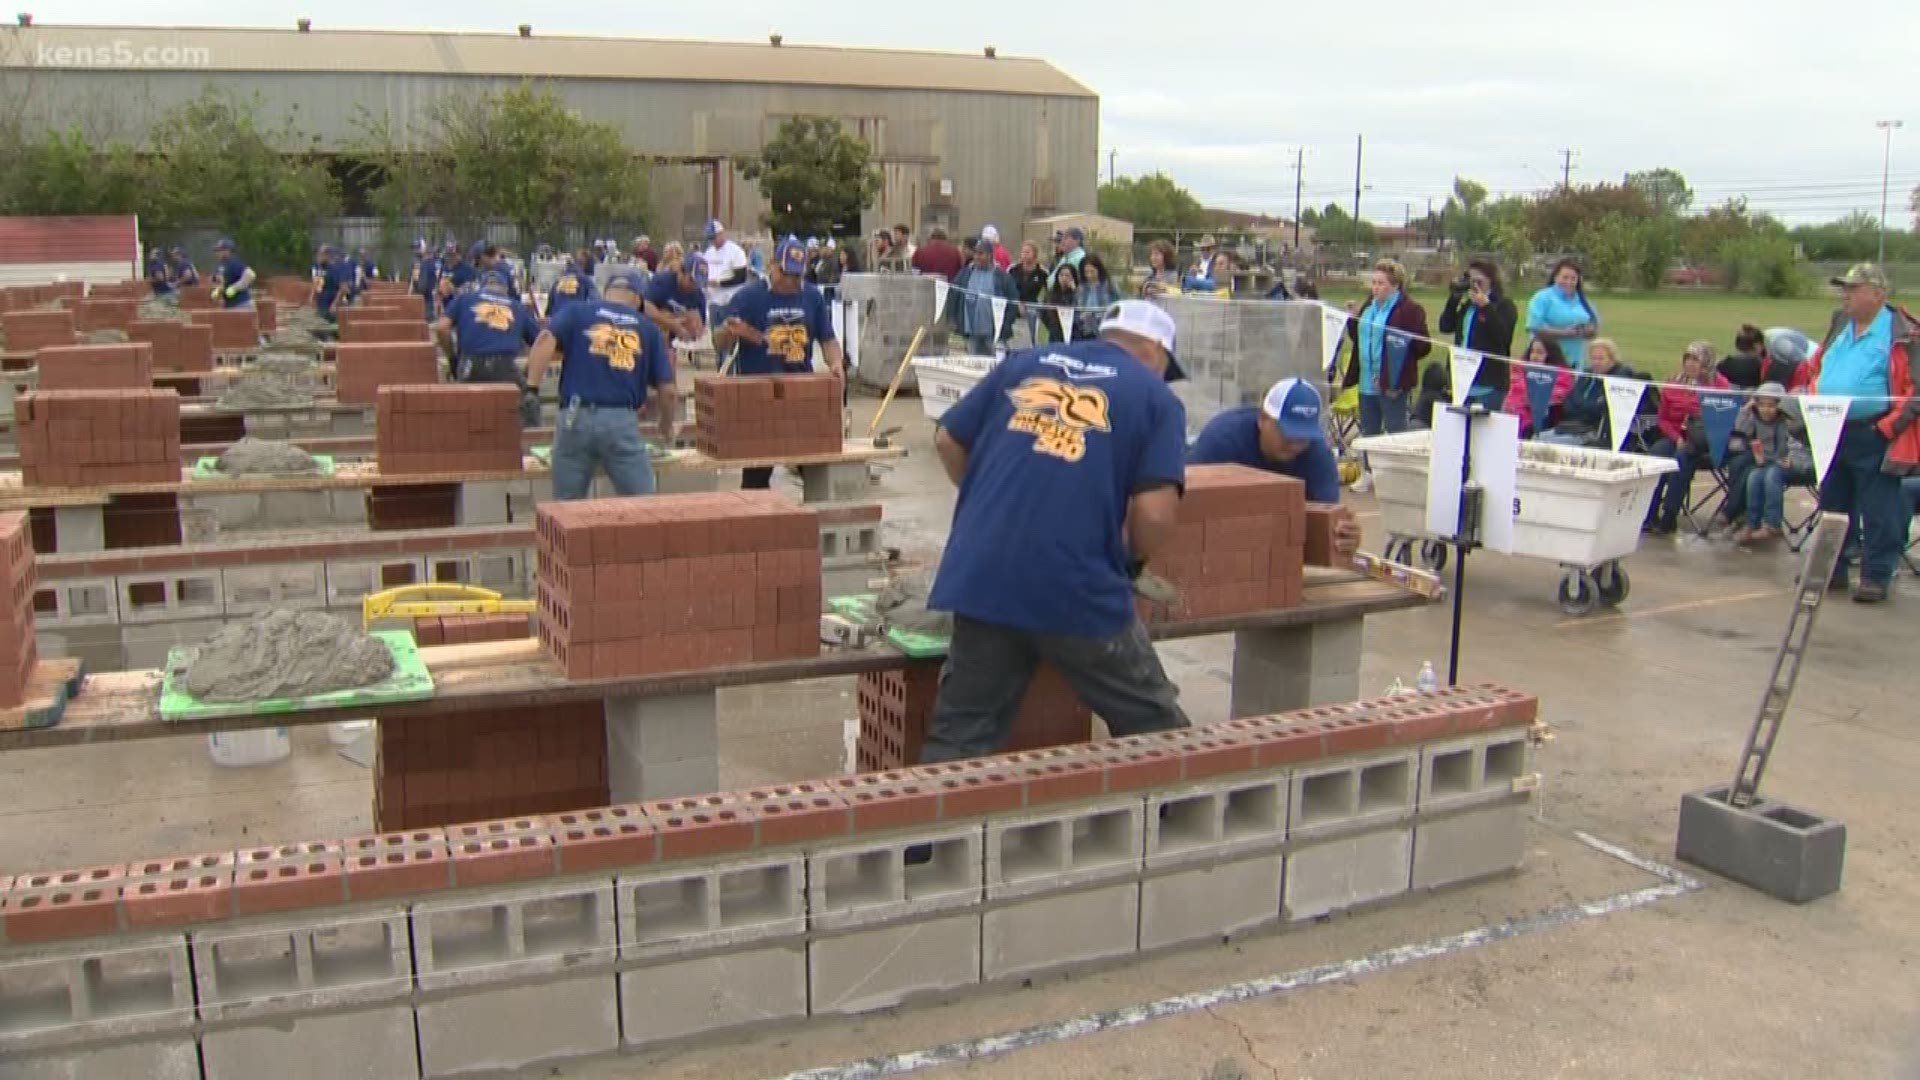 Workers showed off their skills to see which team could lay the most brick with the fewest mistakes. The competition served as a qualifier for the world championships in Las Vegas.